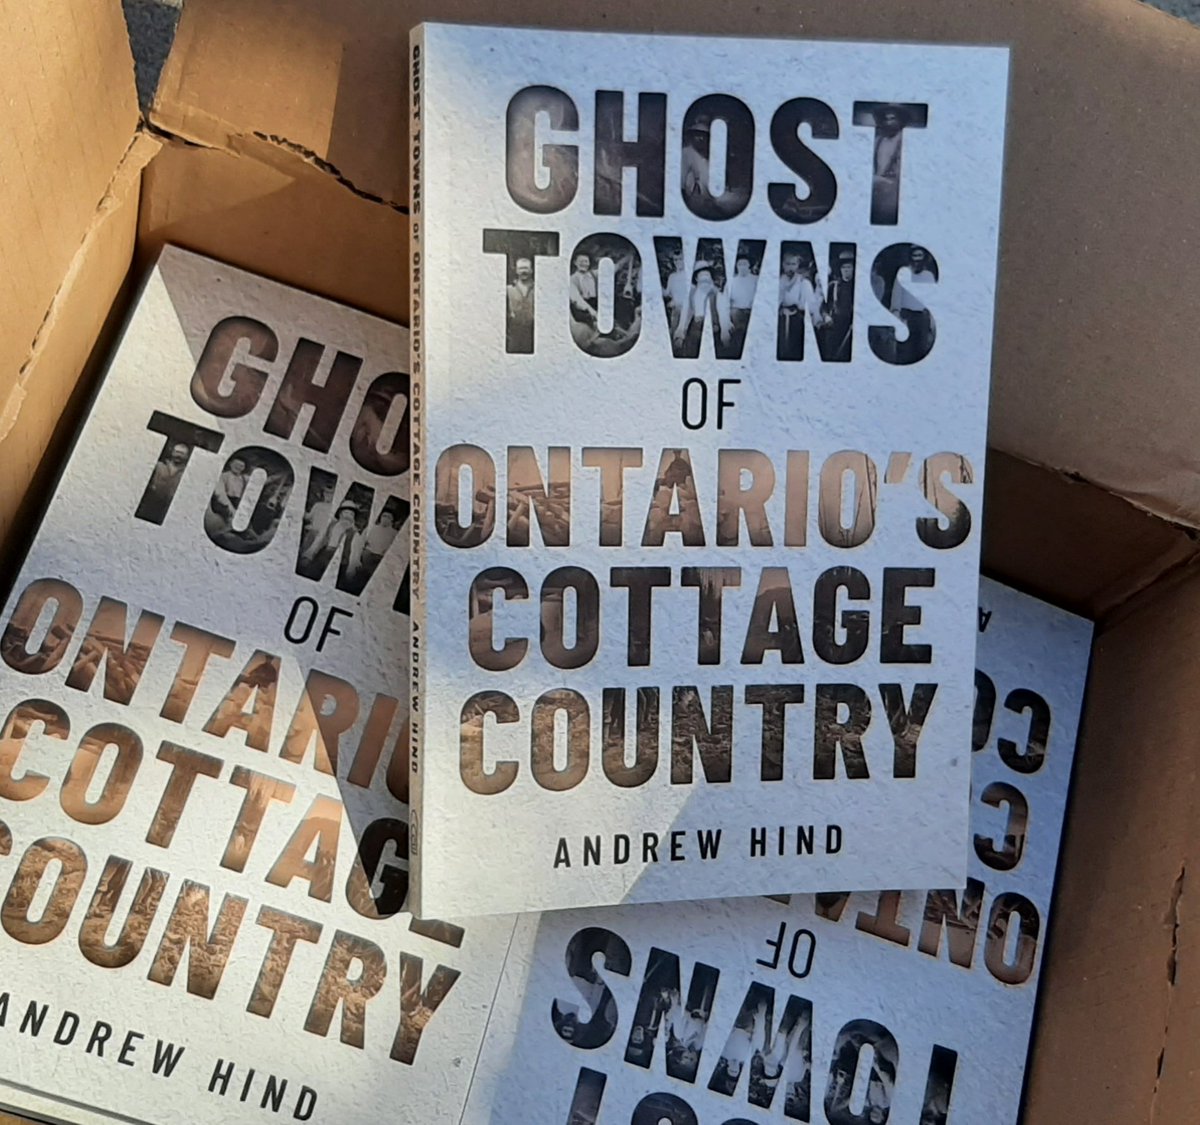 Authors' copies of my latest book have arrived from @dundurnpress. Just a few short weeks before it can be found on store shelves!

#writerslife #WritingCommunity #ghosttowns #History #explorehistory #explorer